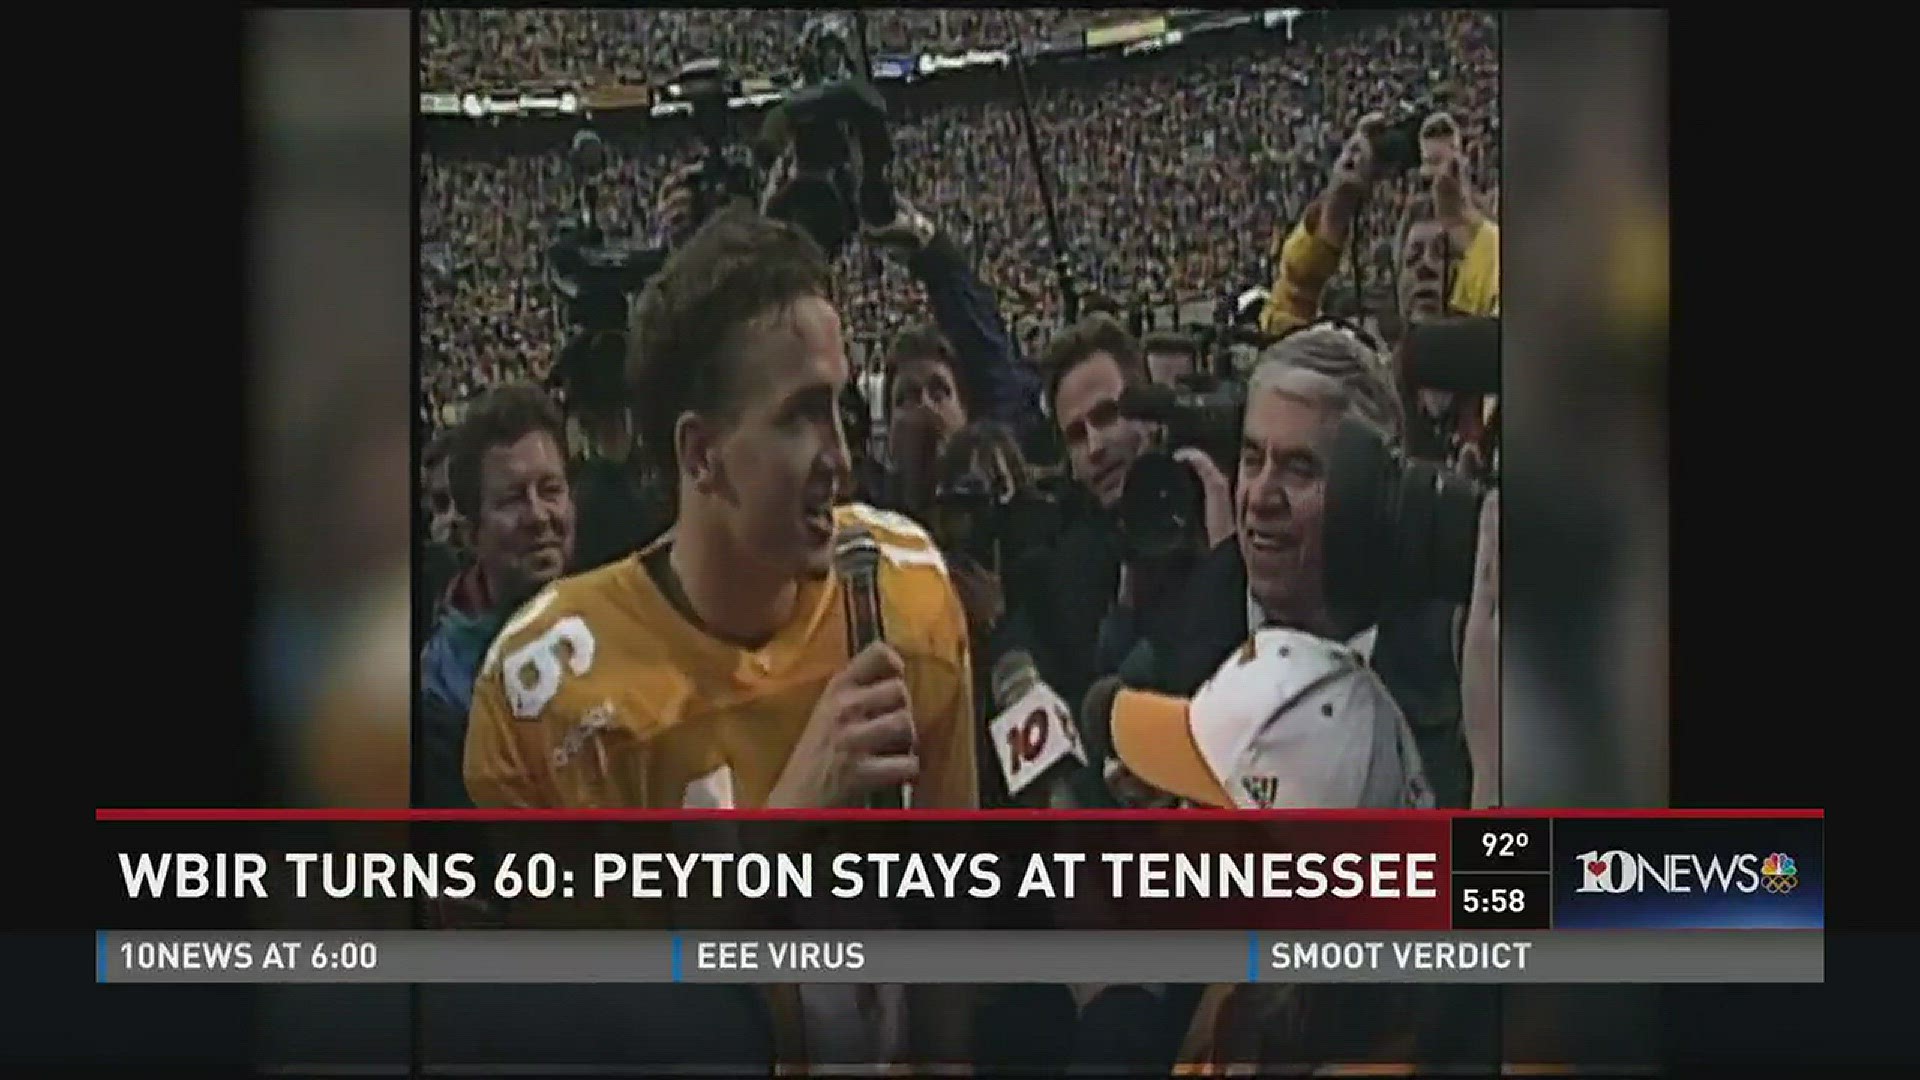 In March of 1997, Peyton Manning announced that he would stay at the University of Tennessee for his senior season rather than going pro. August 3, 2016.